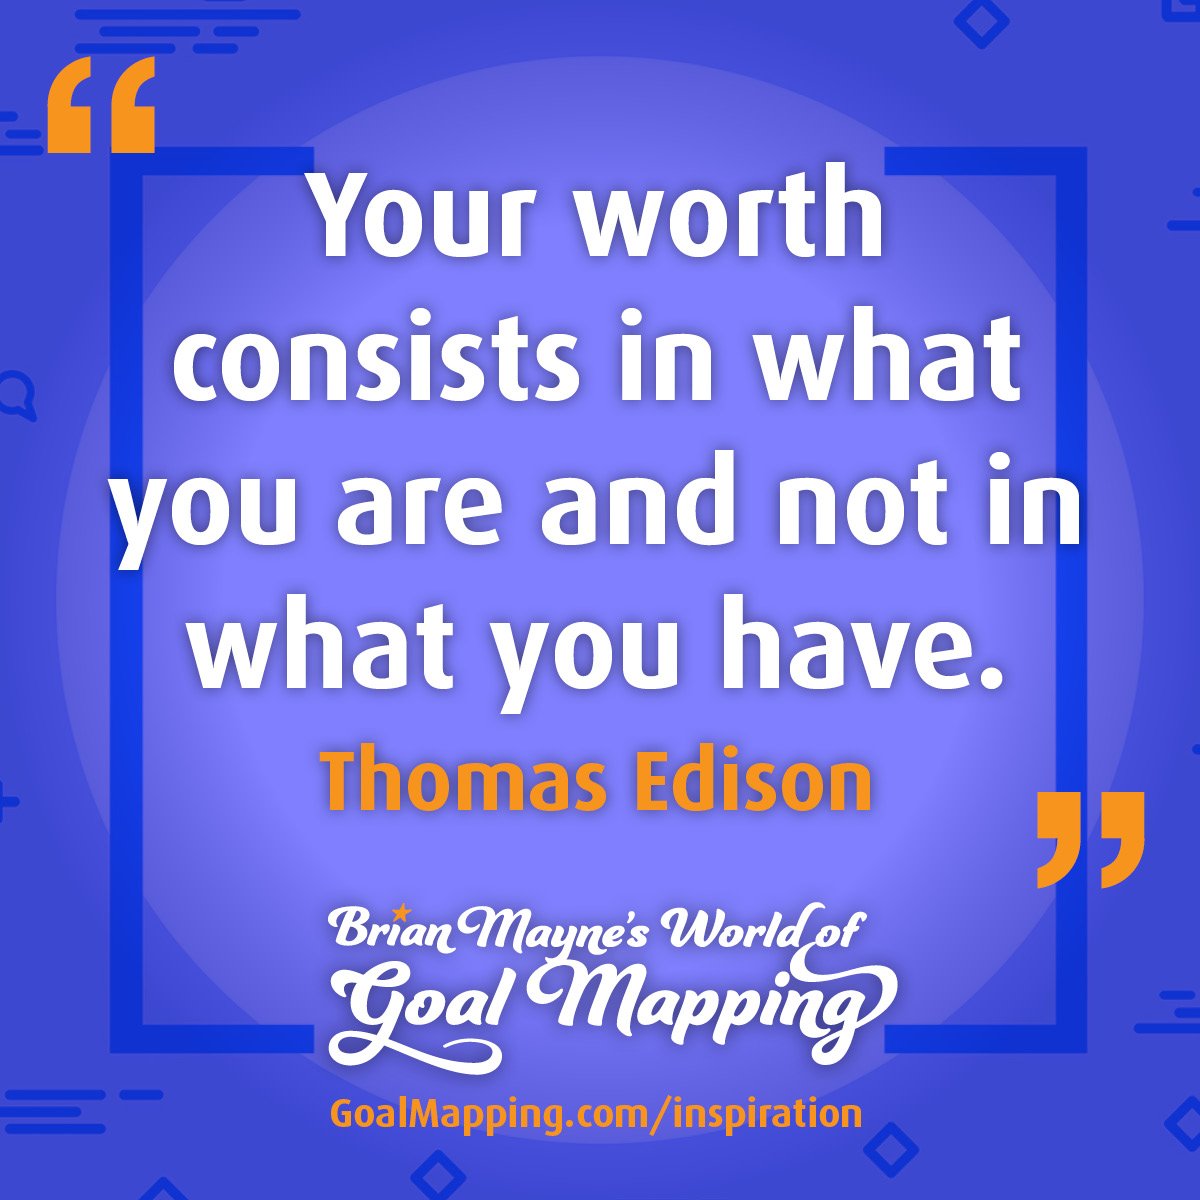 "Your worth consists in what you are and not in what you have."  Thomas Edison